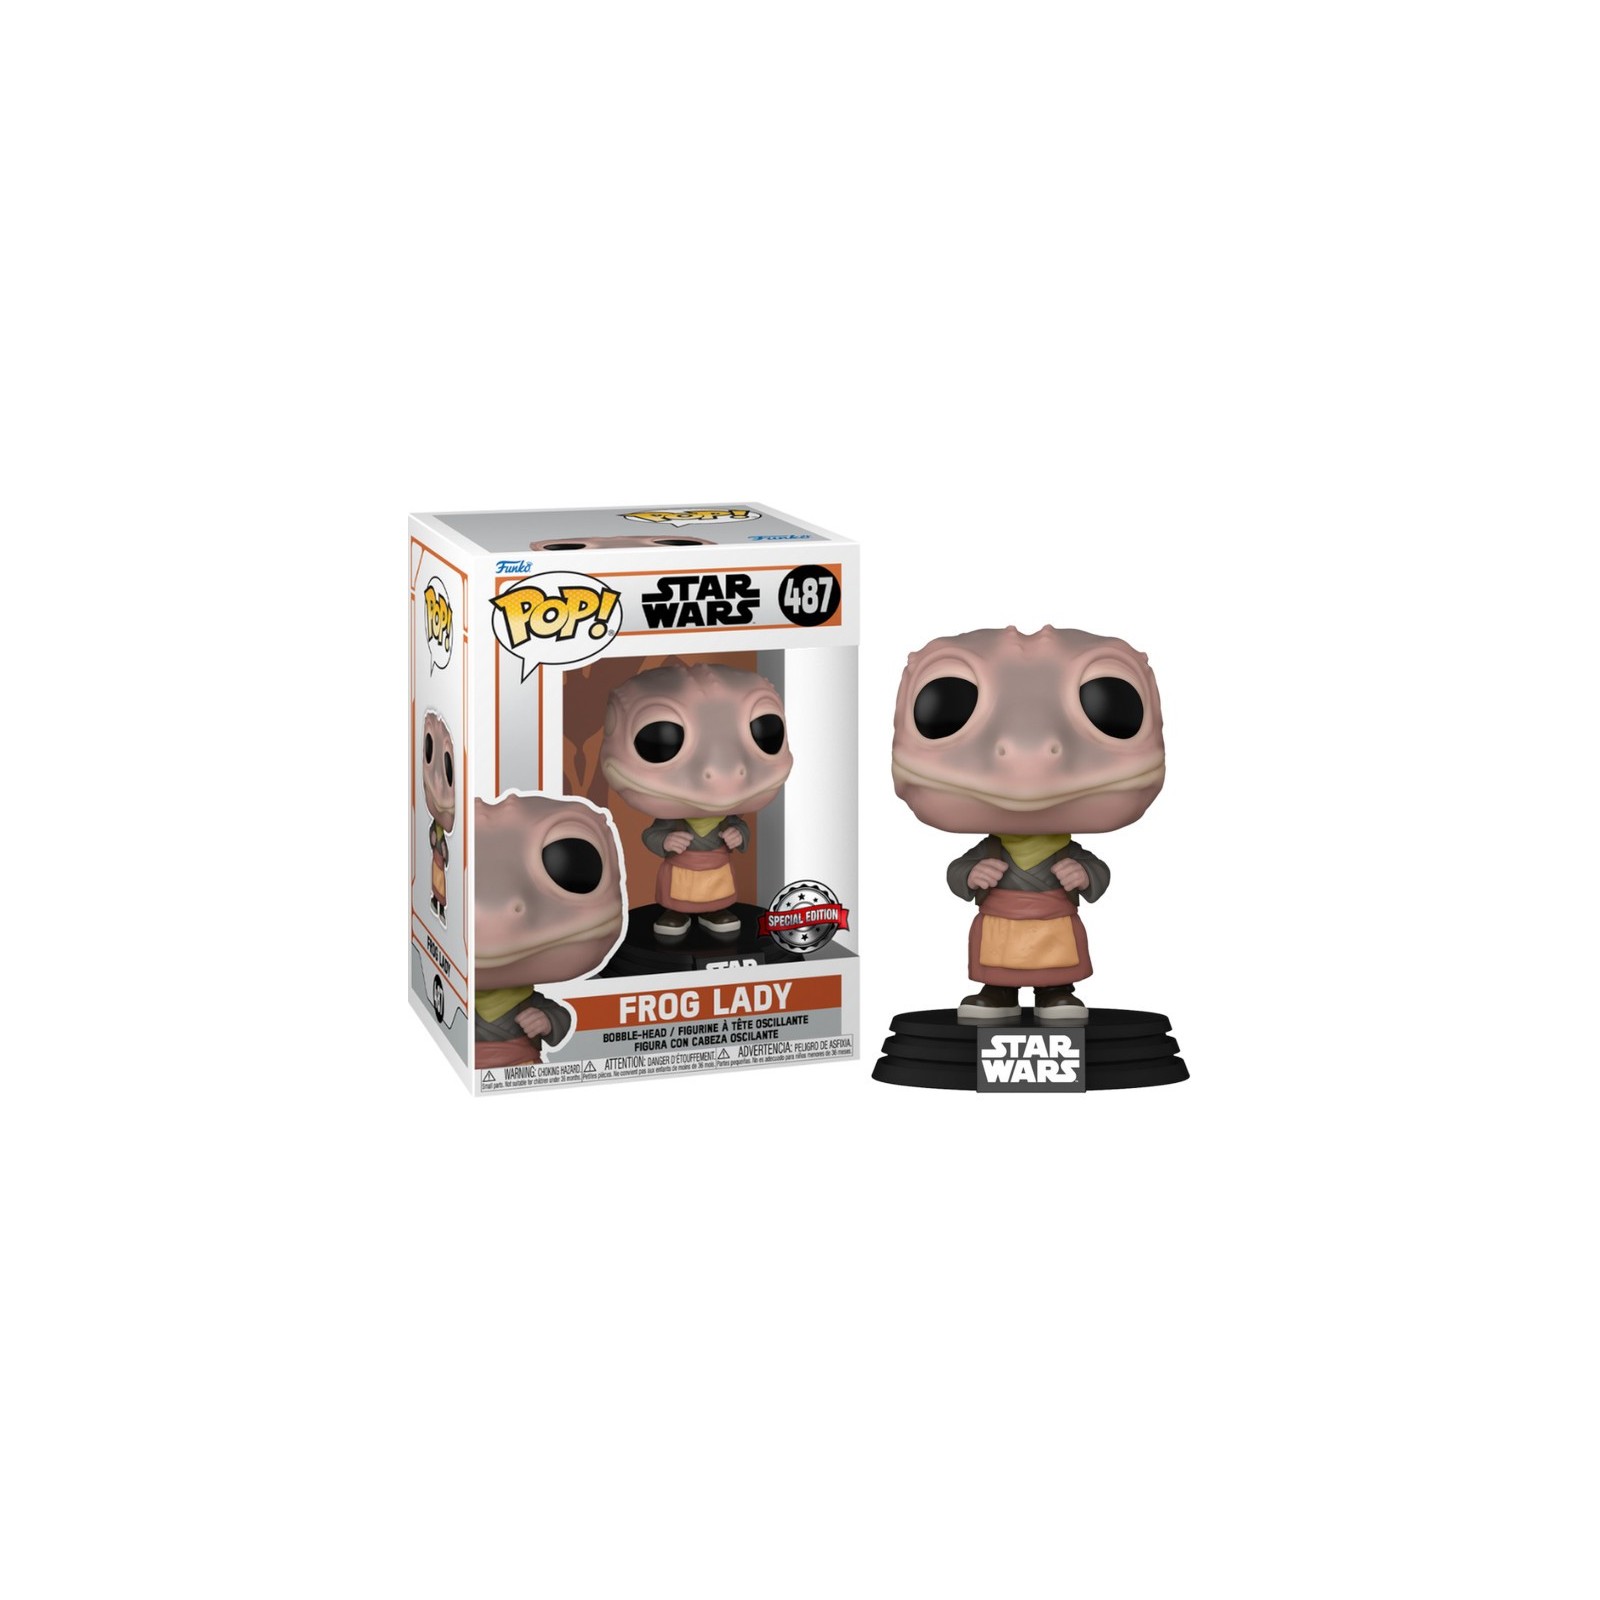 FUNKO POP! STAR WARS: FROG LADY (487) SPECIAL EDITION